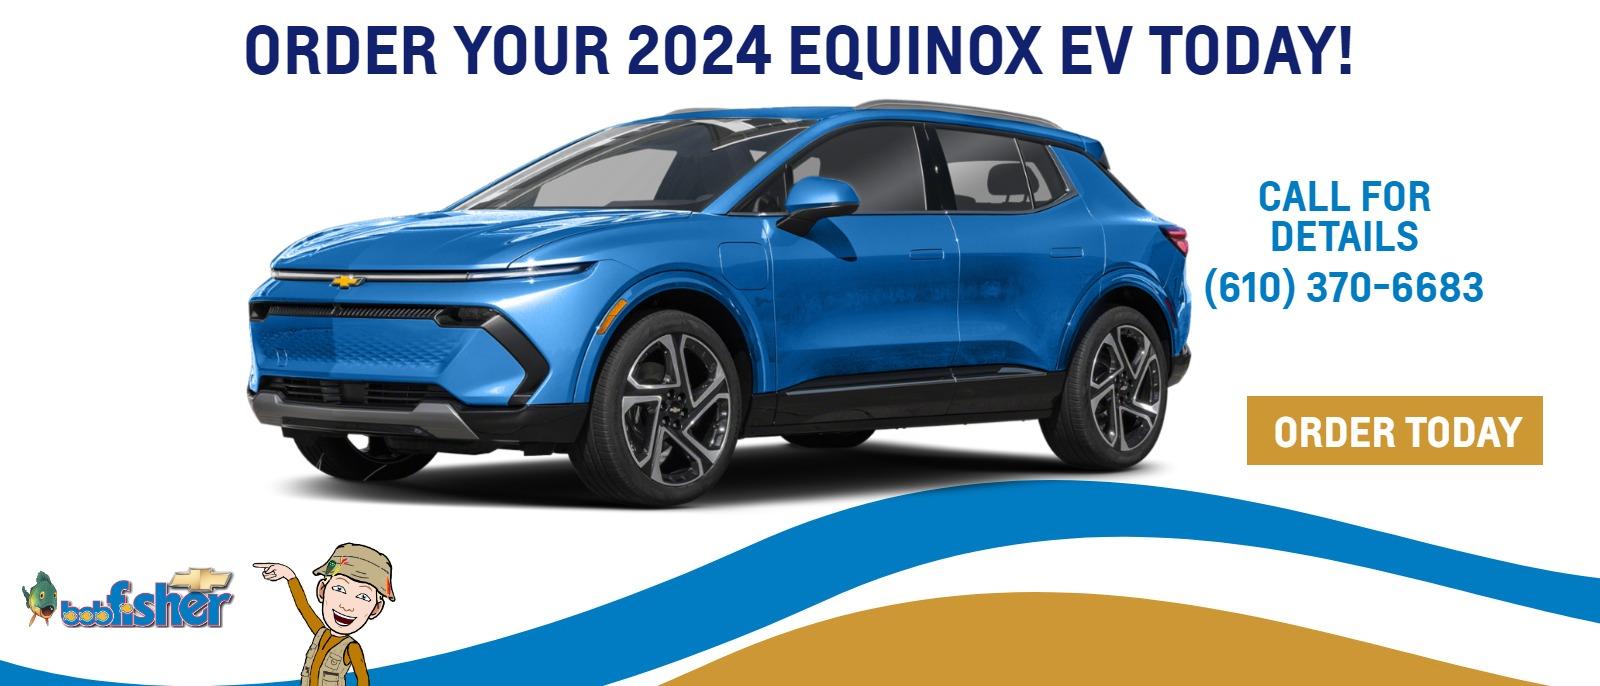 Order Your 2024 Blazer EV Today!
CALL FOR DETAILS (610) 370-6683